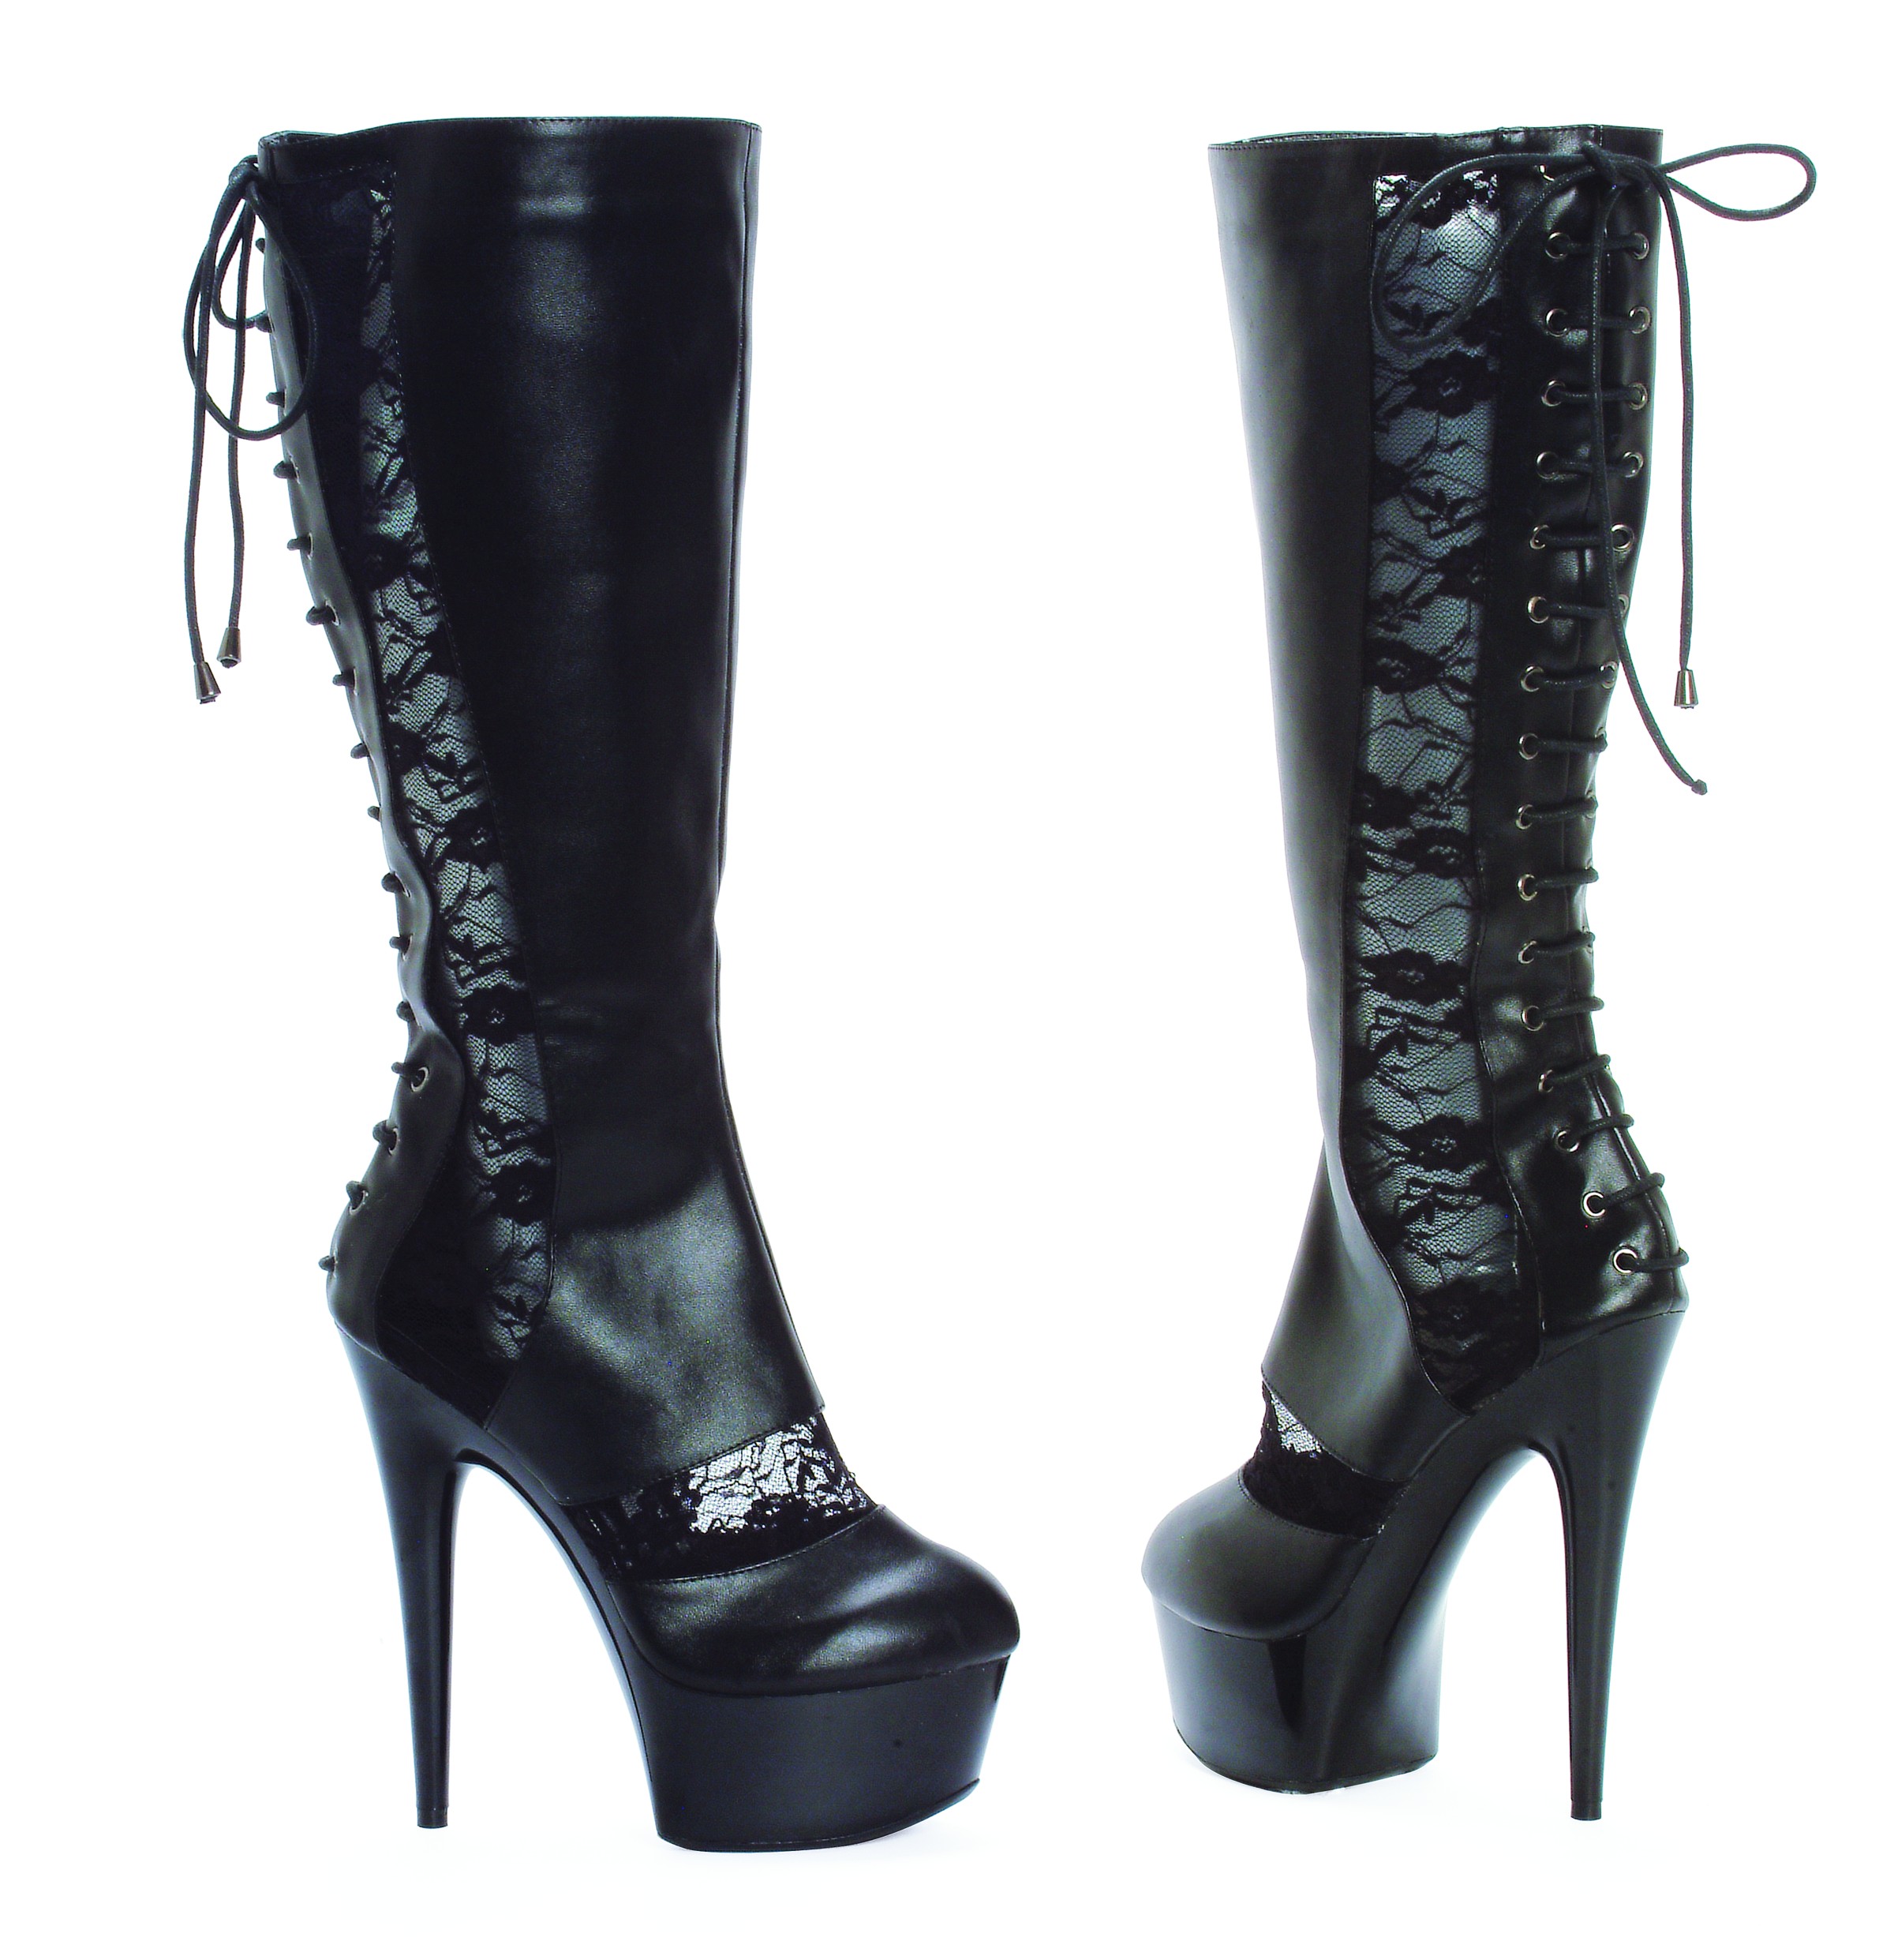 Haley - 6 Inch Lace Detail Knee Boot